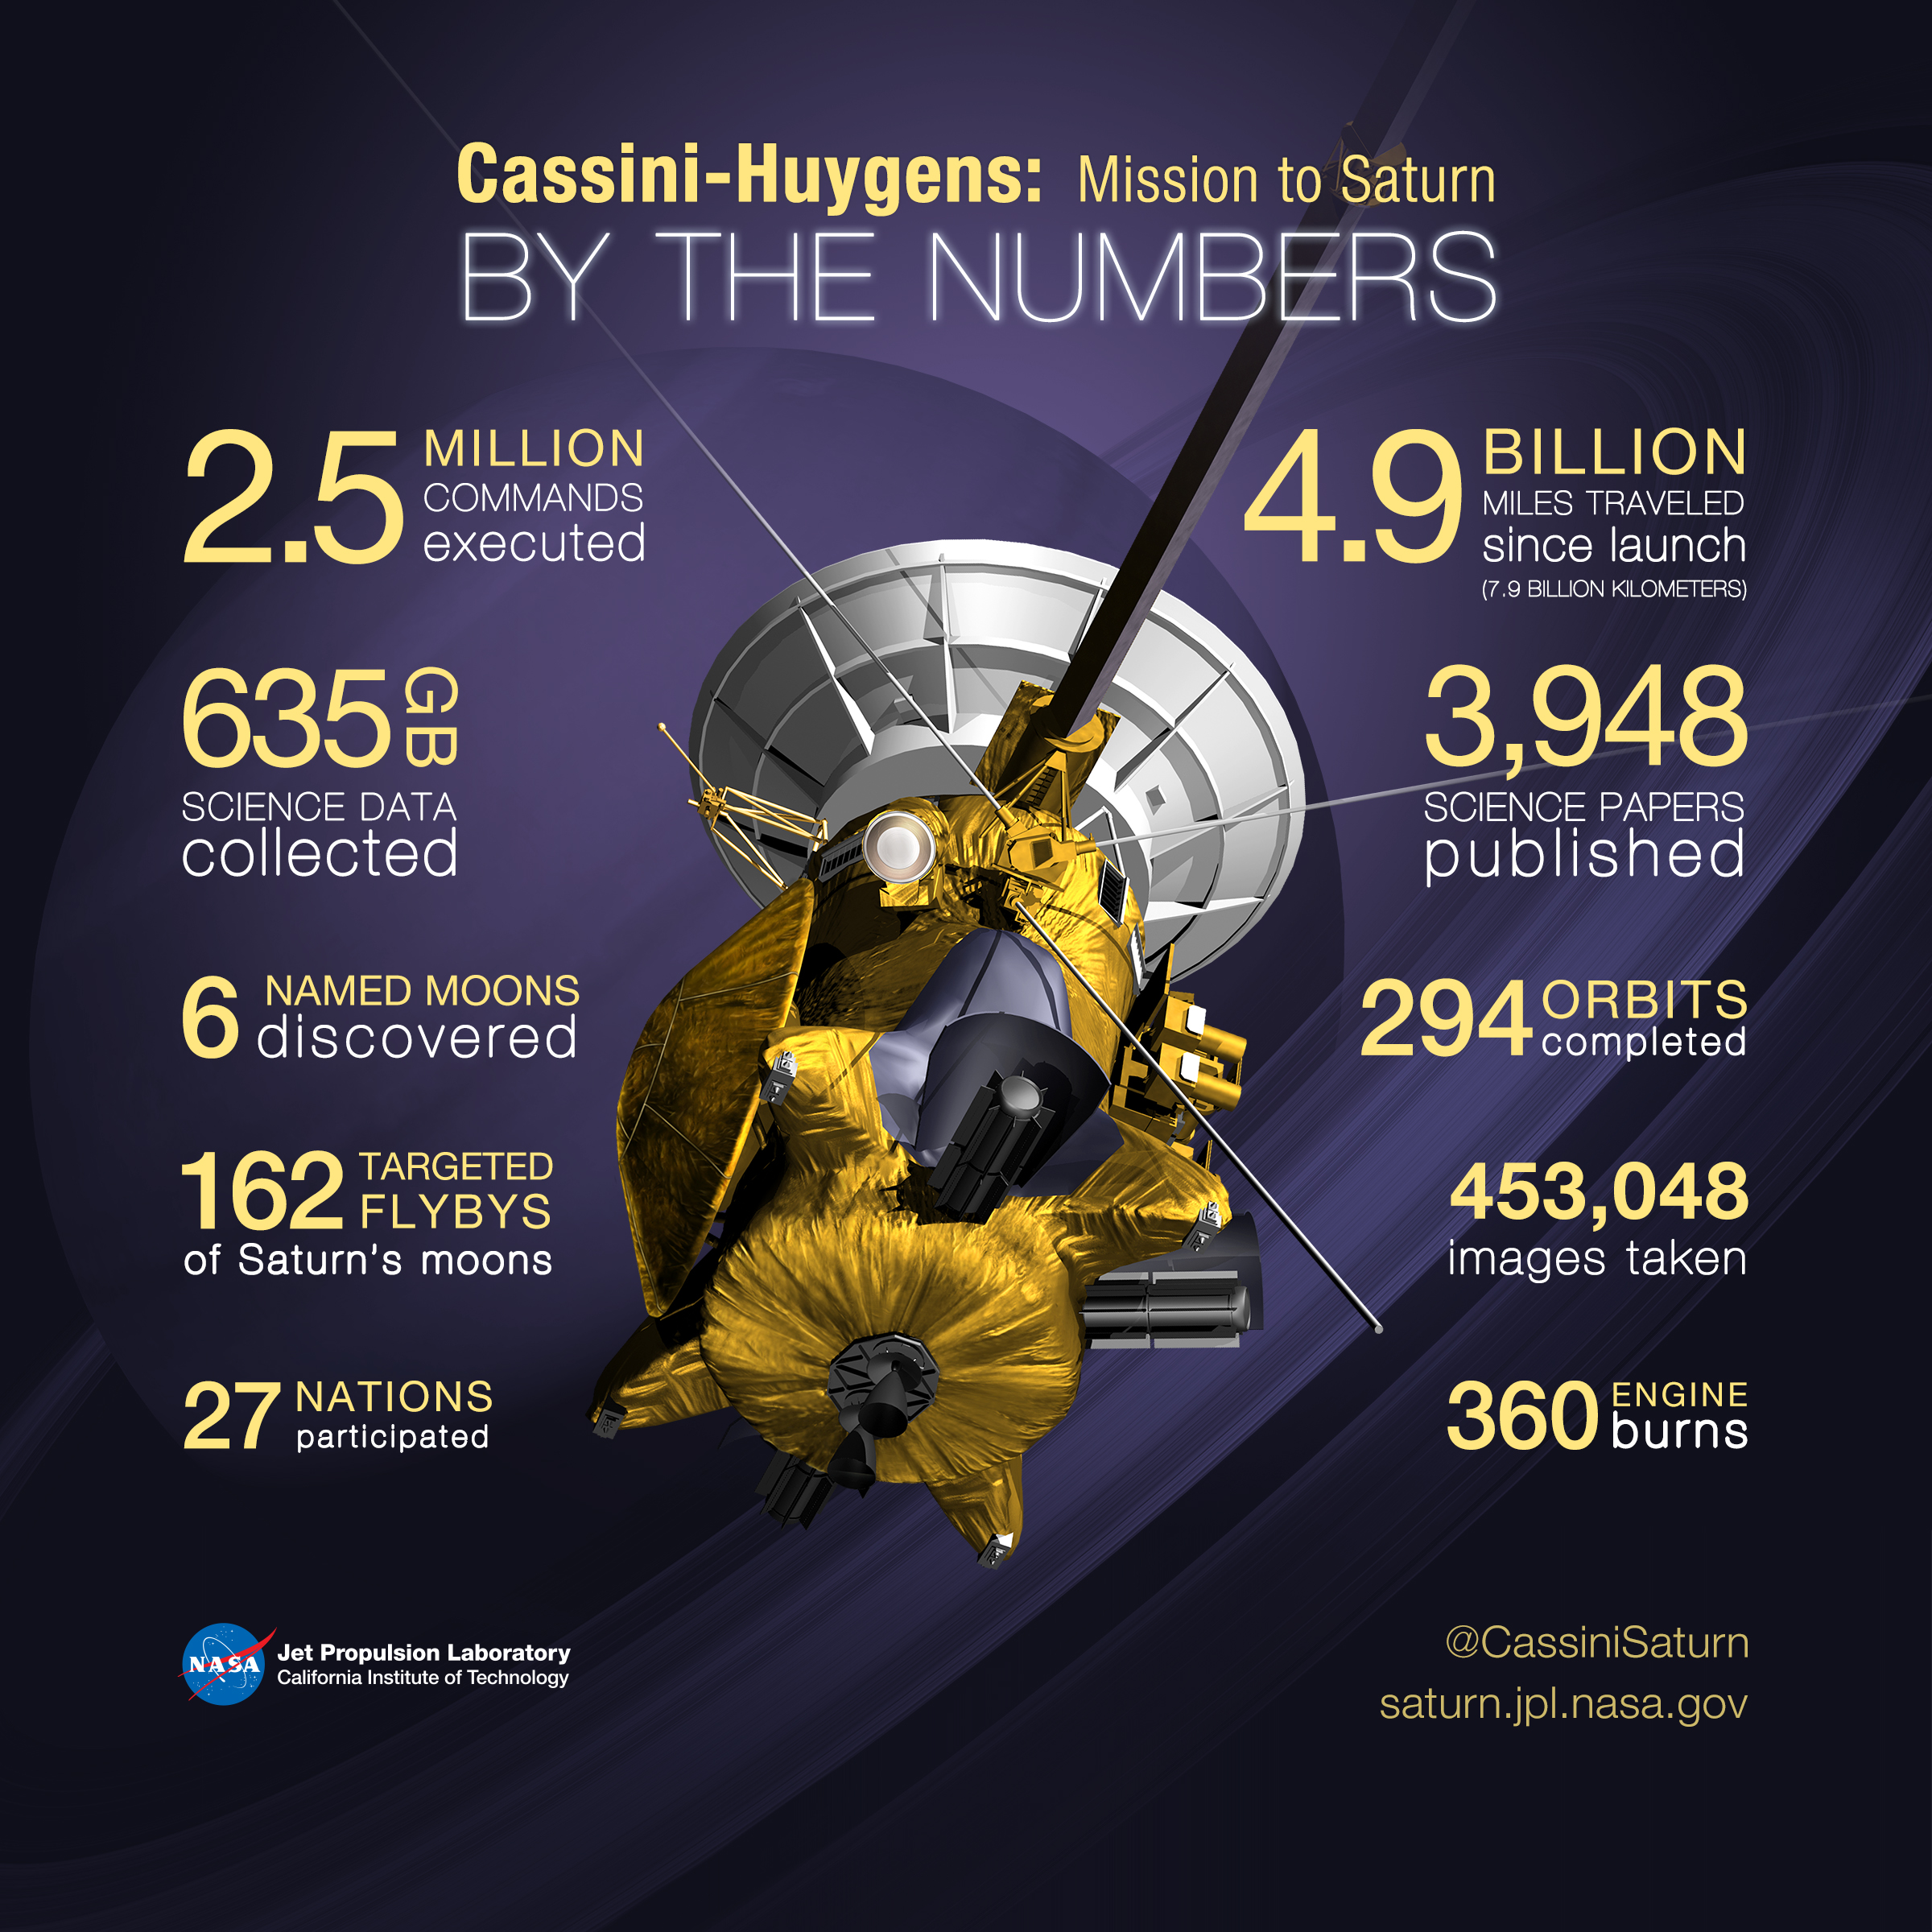 Cassini: A NASA orbiter mission launched back in 1997 towards Saturn to be the first mission ever to orbit it. Cassini ended its mission back in 2017 in a grand finale with 22 close flybys between Saturn and its rings. The spacecraft was equipped with two main engines; one primary and the other was a backup. For small route corrections, 16 thrusters were available; 8 primary and 8 secondary. Cassini was covered with 24 layers of thermal blankets to shield itself against the cold temperatures at Saturn’s orbit and also against meteorite impacts. Due to the spacecraft’s distance from the Sun, it wasn’t powered by solar arrays, rather, by three nuclear reactors called “Radioisotope Thermoelectric Generators” (RTG.) ESA also sent the Huygens probe on board Cassini which it landed on Saturn’s moon; Titan back in 2015 to be the first landing on an object located in the outer solar system.